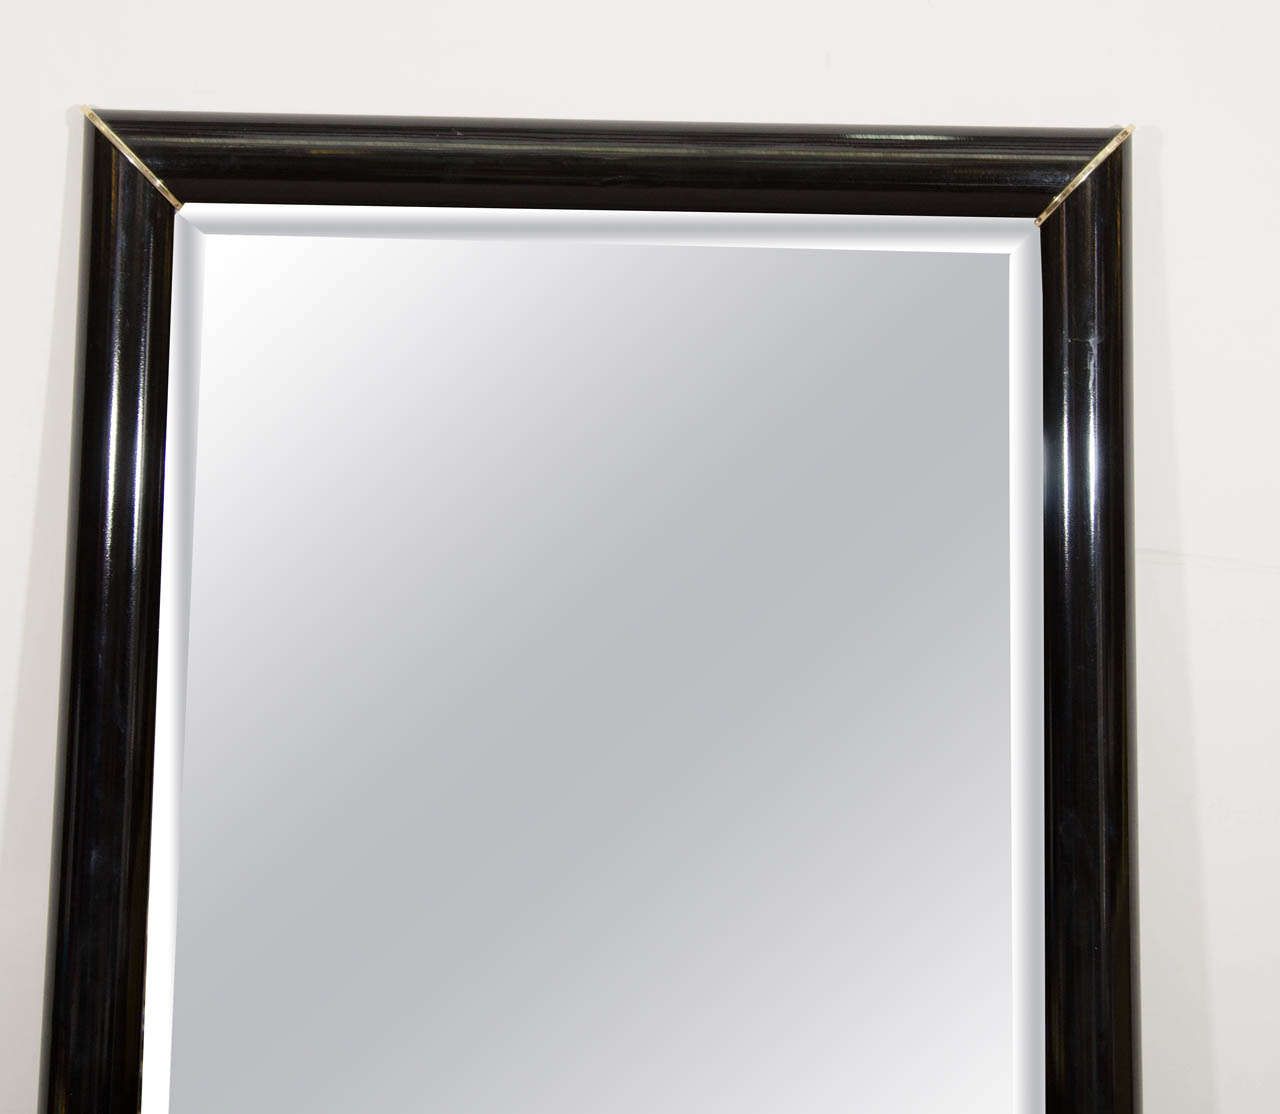 Black Lacquered Wall Mirror With Gold Corner Accents At 1stdibs Regarding Cut Corner Wall Mirrors (View 2 of 15)